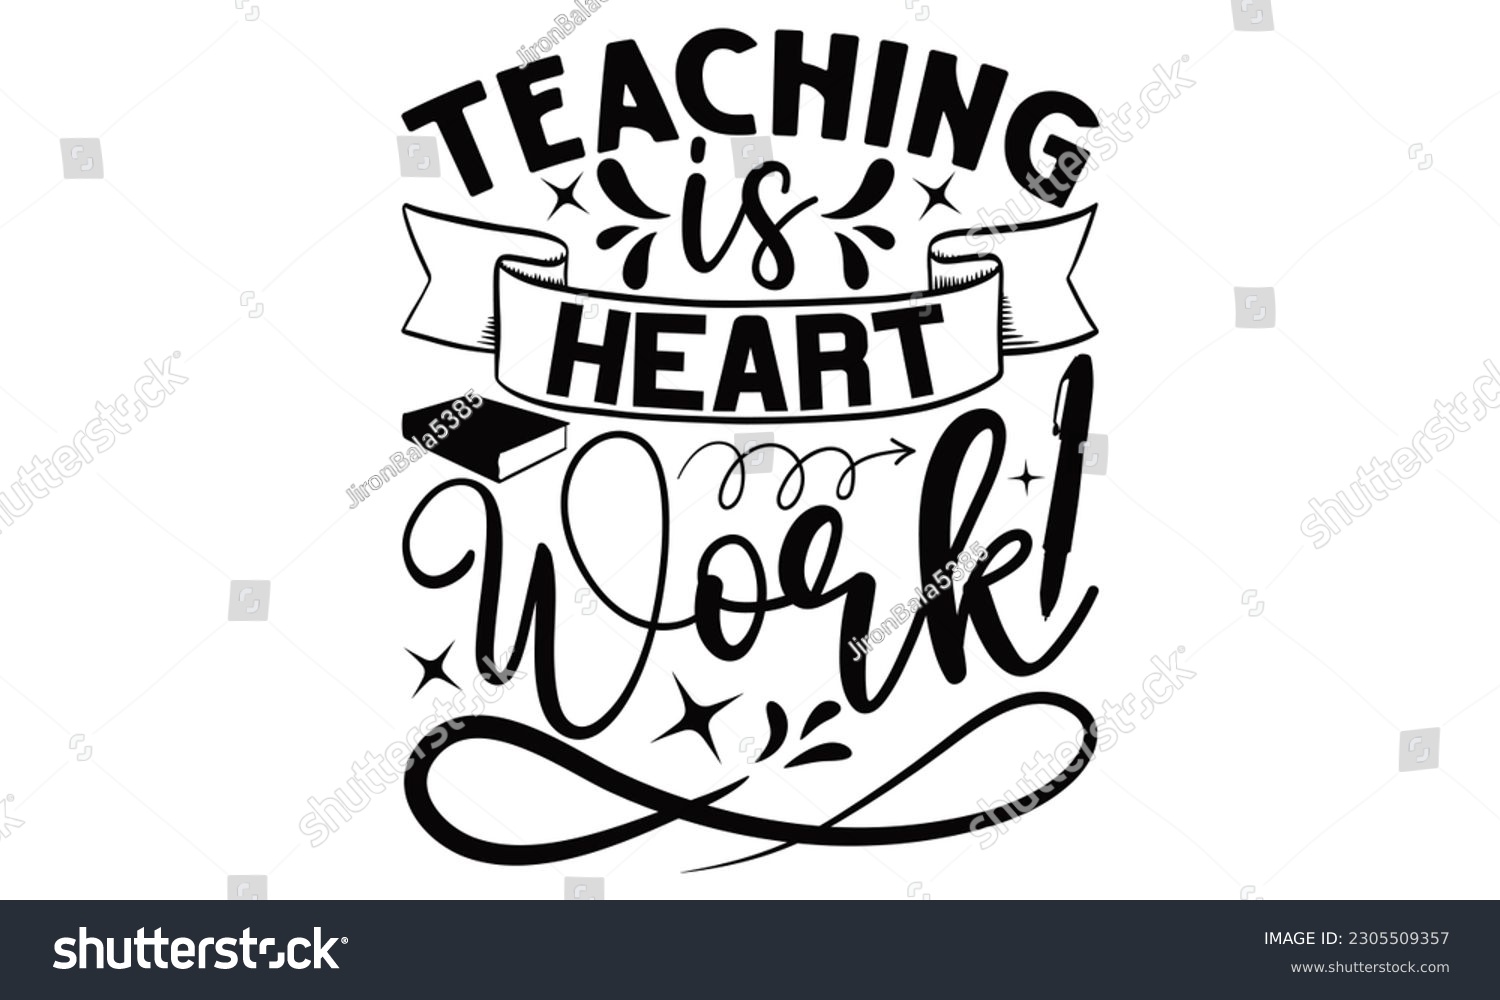 SVG of Teaching Is Heart Work - School SVG Design, Hand drawn lettering phrase, Illustration for prints on t-shirts, bags, posters and cards, for Cutting Machine, Silhouette Cameo, Cricut. svg